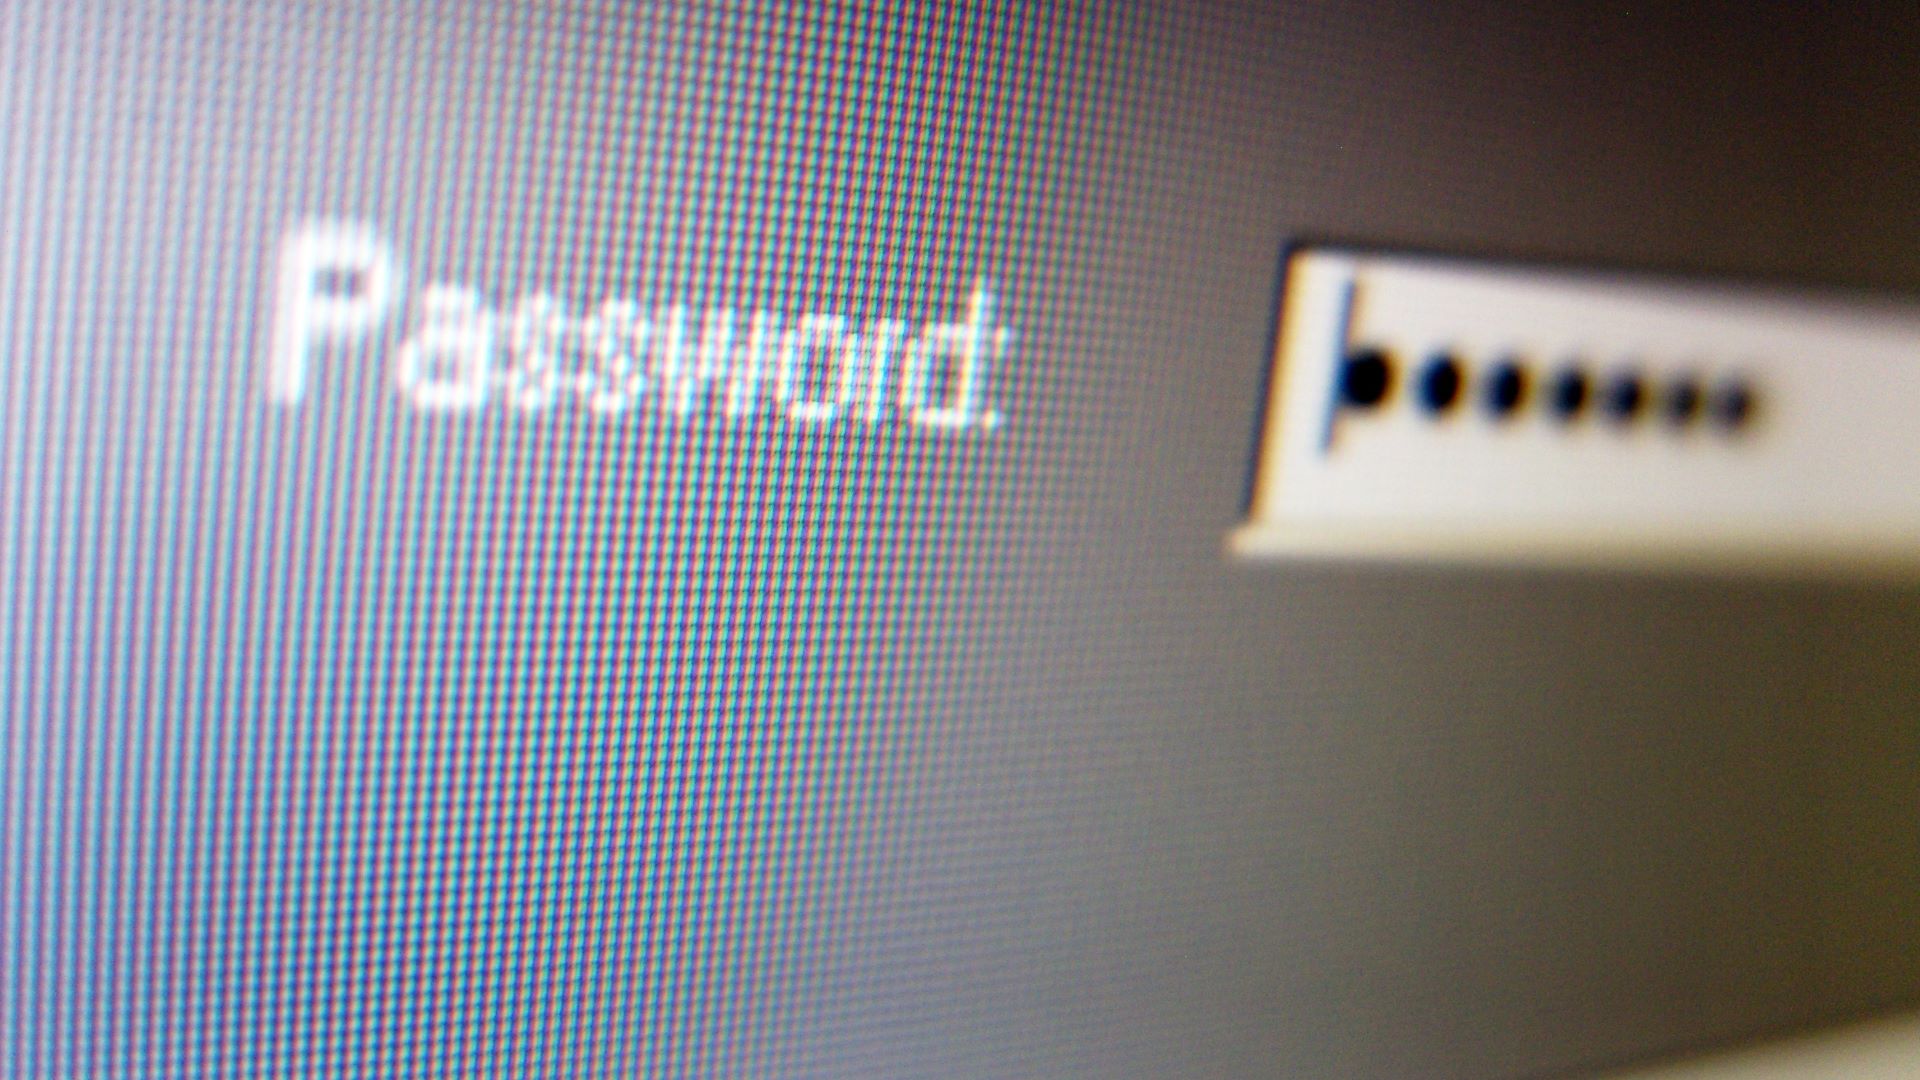 A zoomed-in picture of a password entry screen. A password has been entered but is concealed